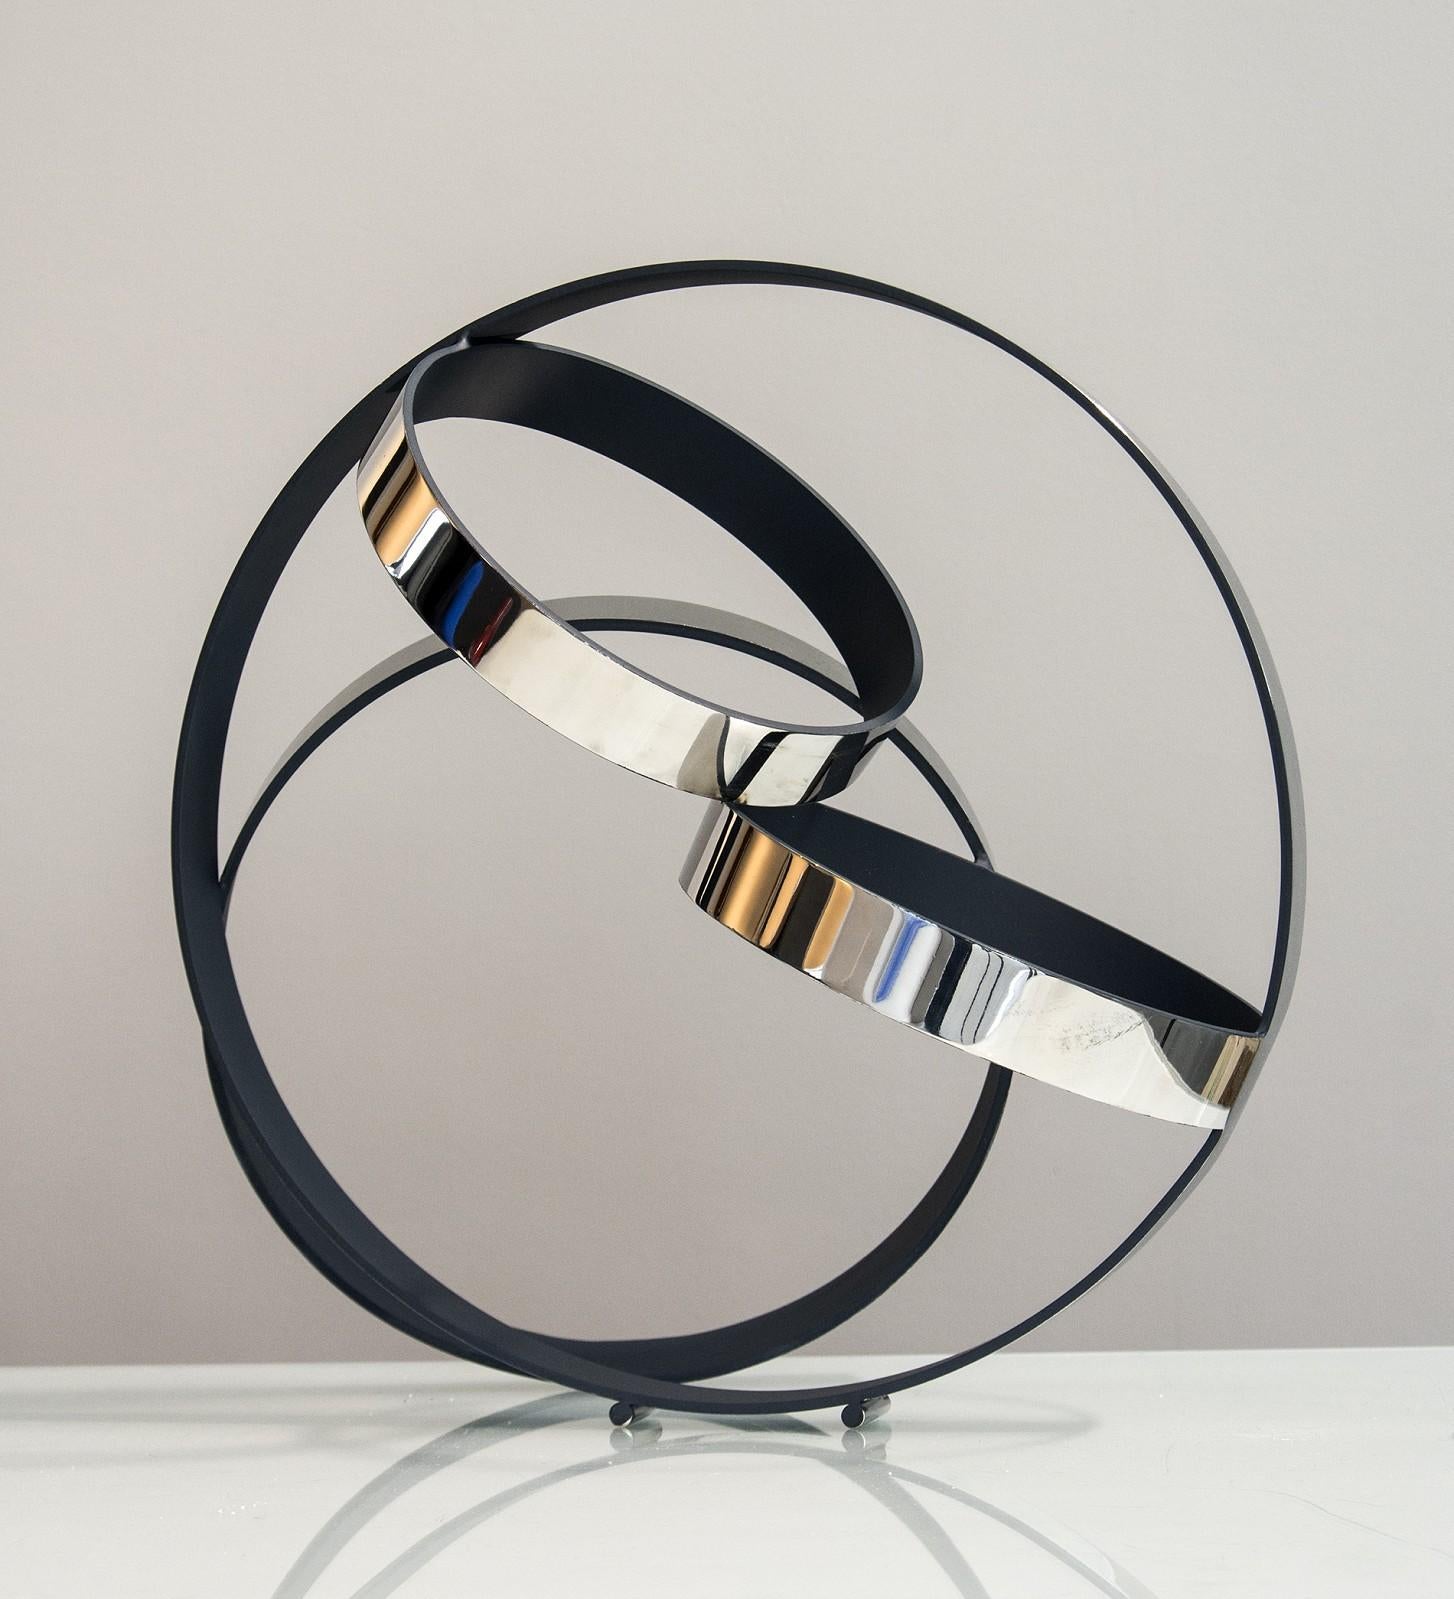 Four Ring Temps Zero Blue Poseidon 3/10 - Steel rings with blue interior - Contemporary Sculpture by Philippe Pallafray